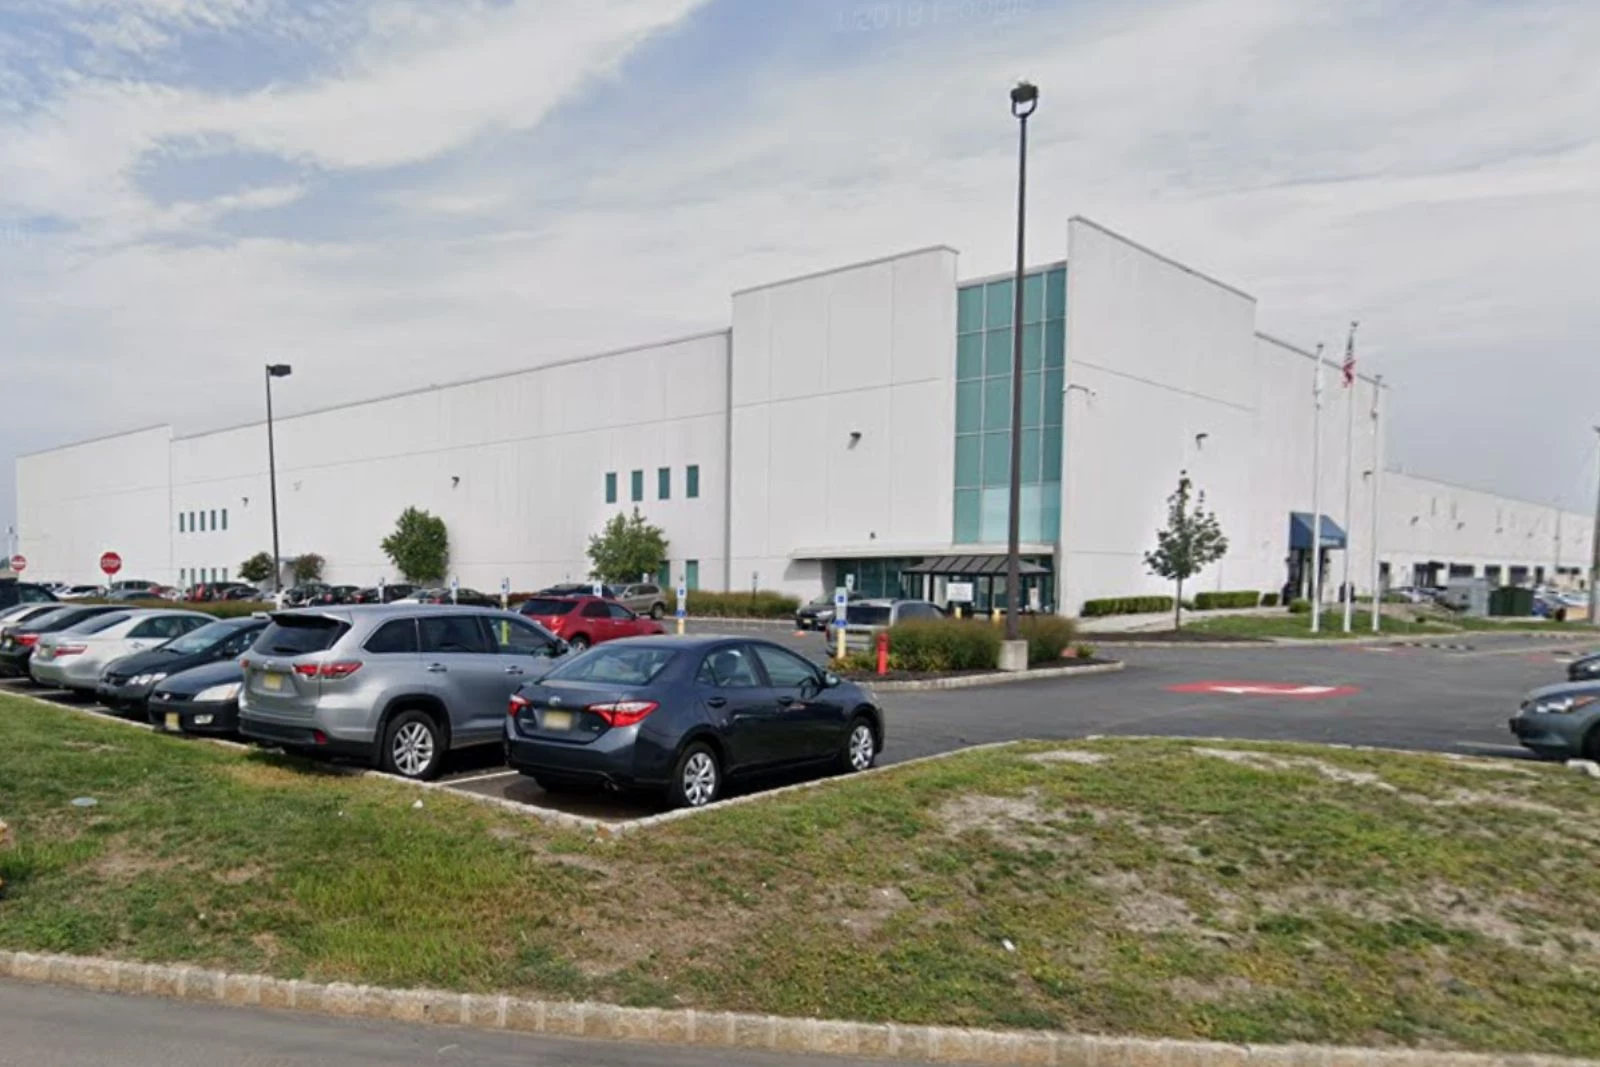 Amazon Worker in Carteret, NJ, Dies During Busy Prime photo photo